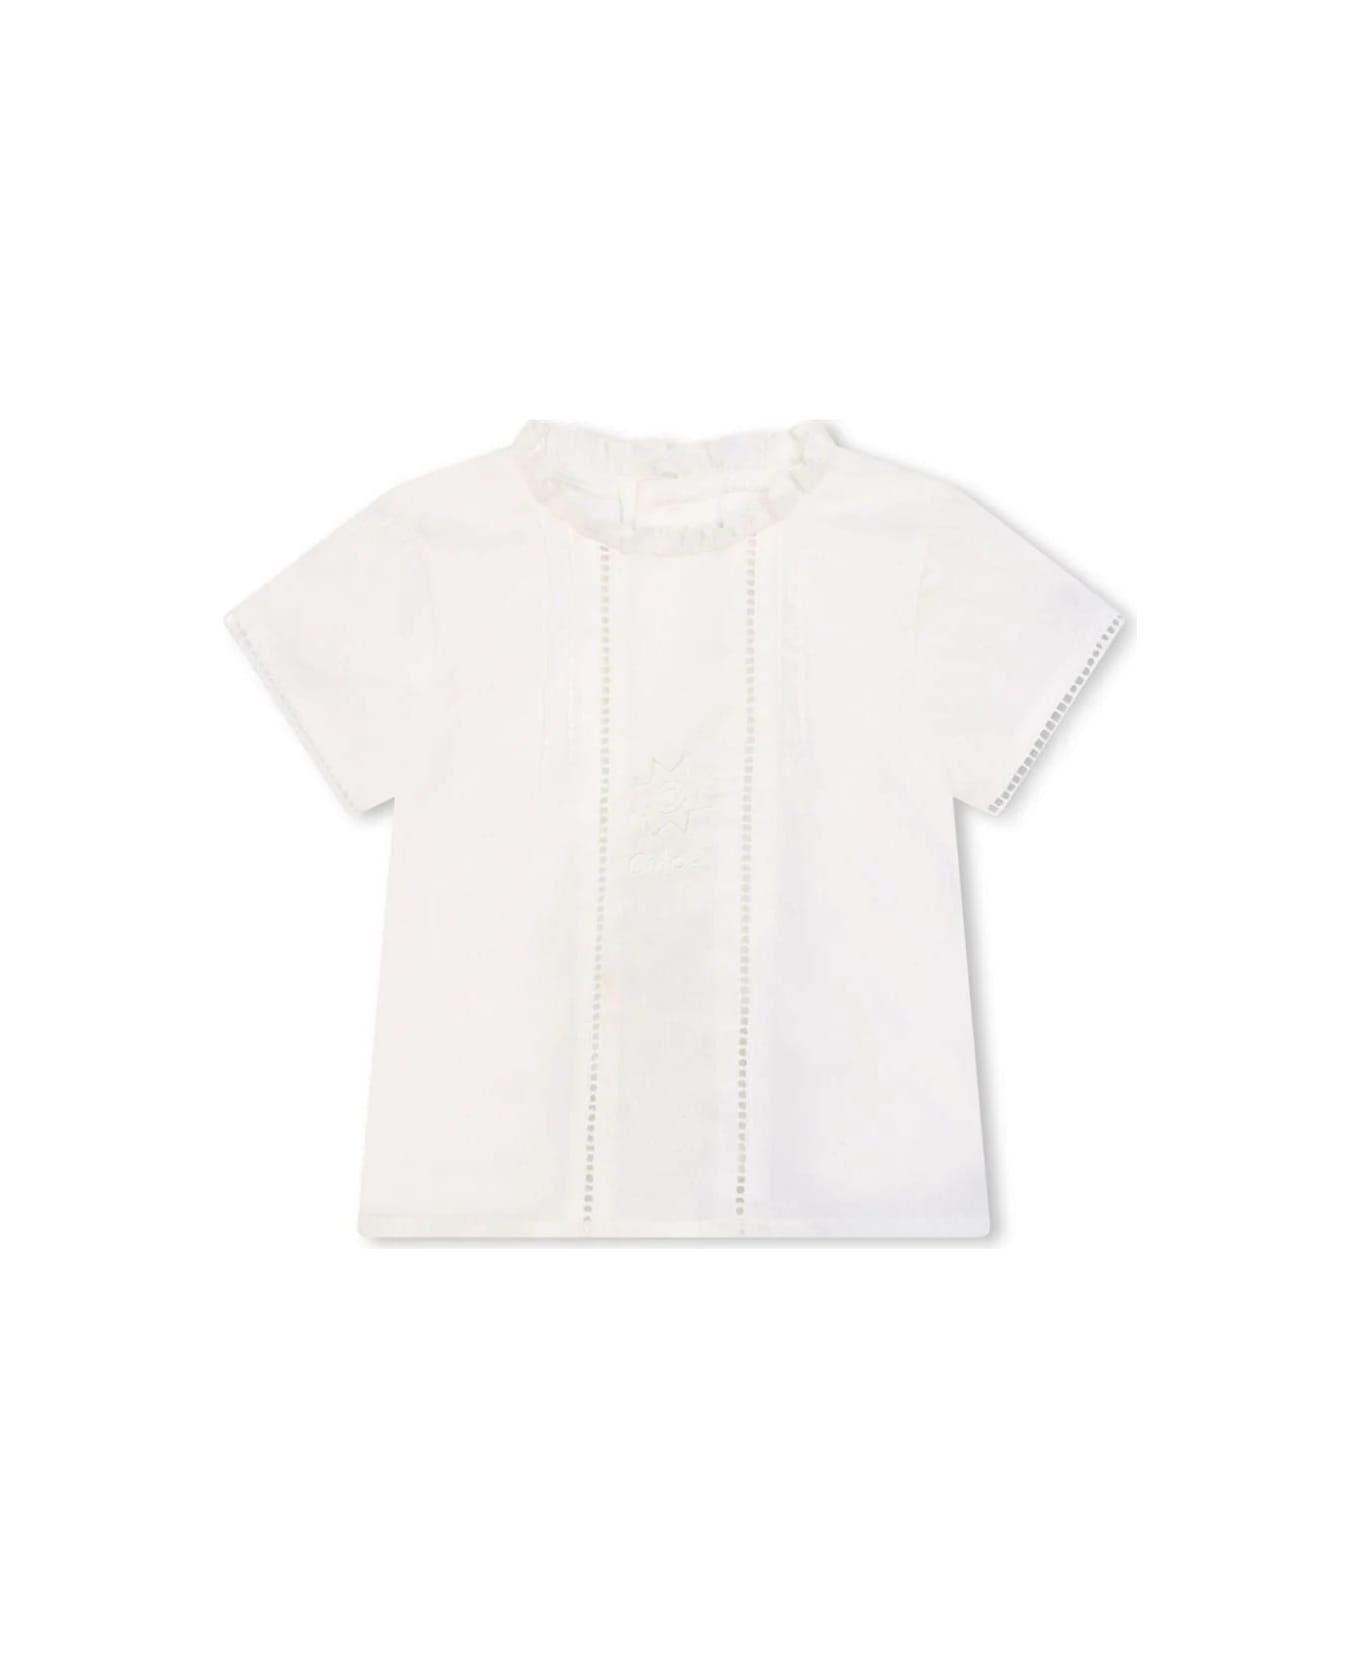 Chloé Blouse And Shorts Set - White ボディスーツ＆セットアップ